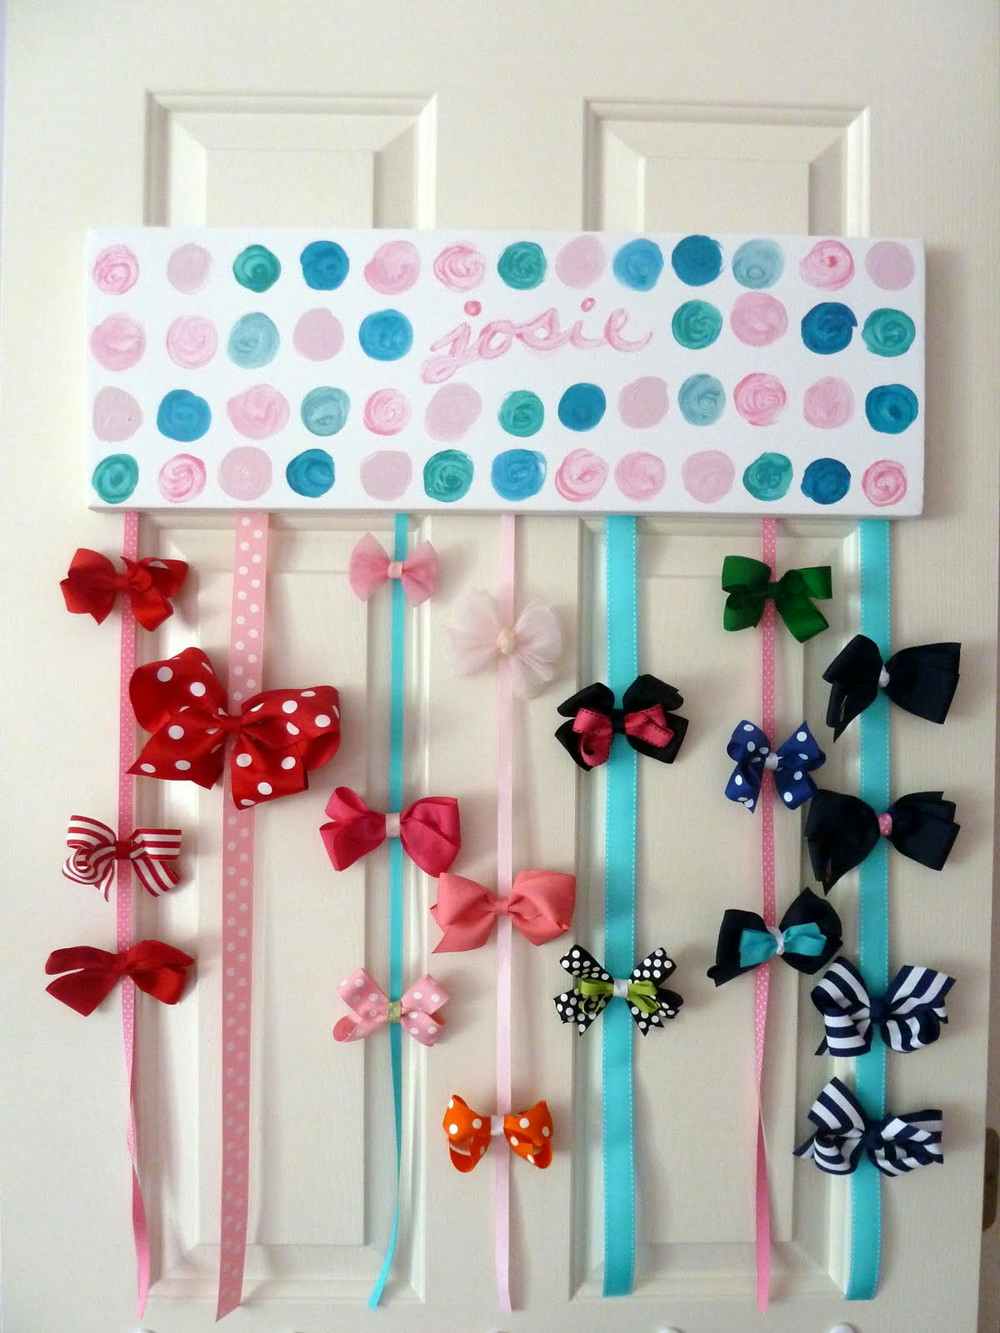 Keep clips and bows organized with hanging ribbons.